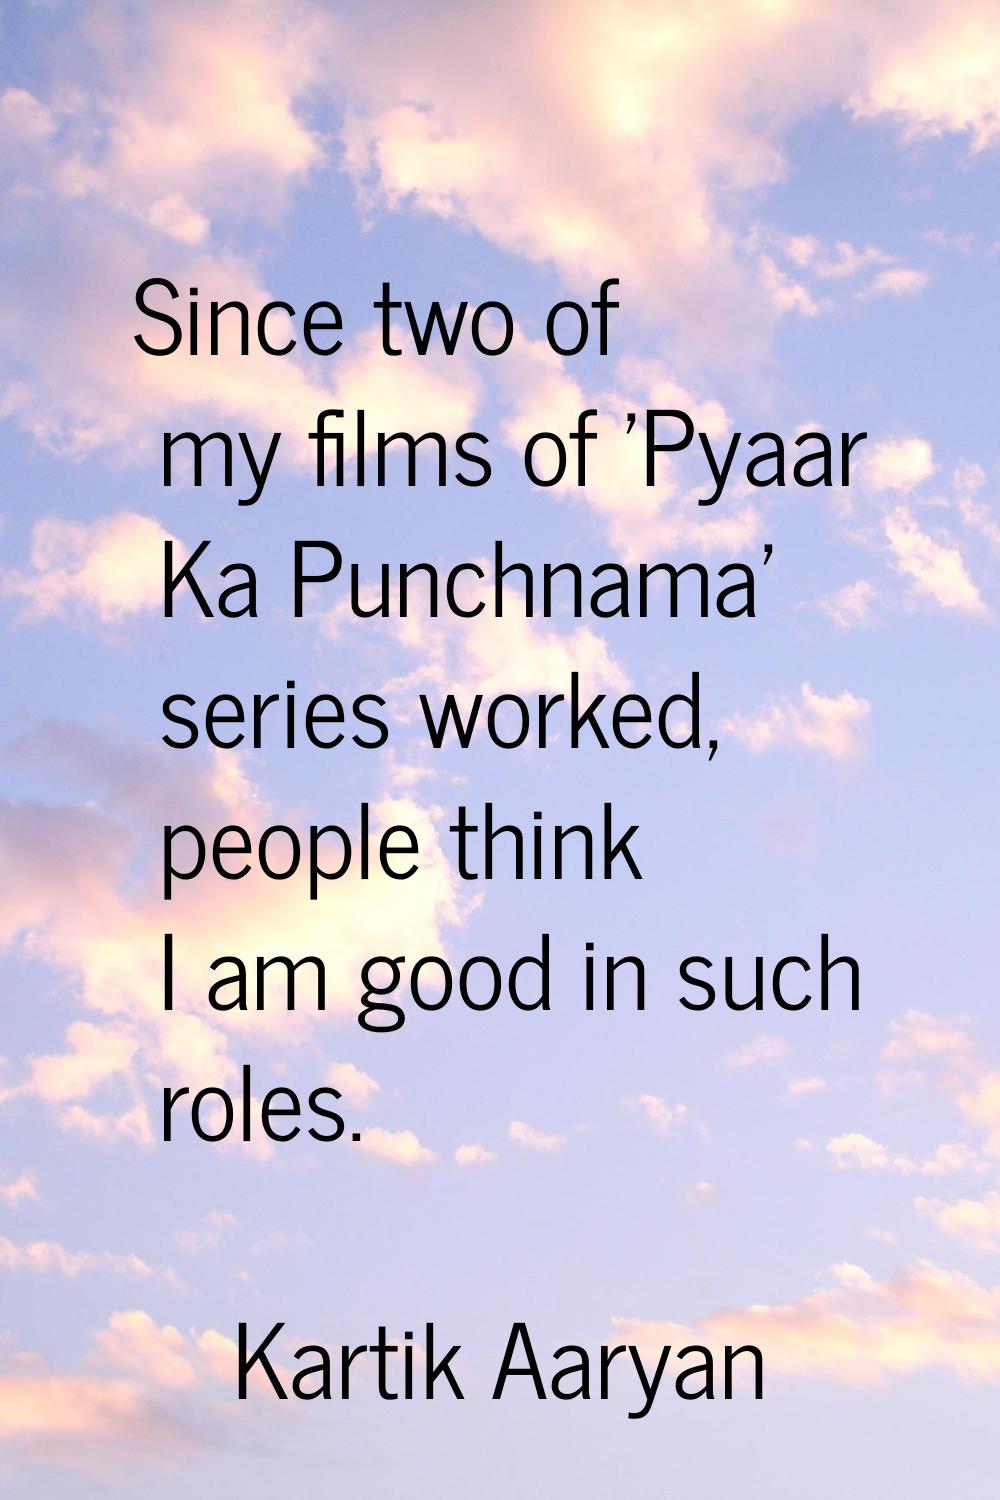 Since two of my films of 'Pyaar Ka Punchnama' series worked, people think I am good in such roles.